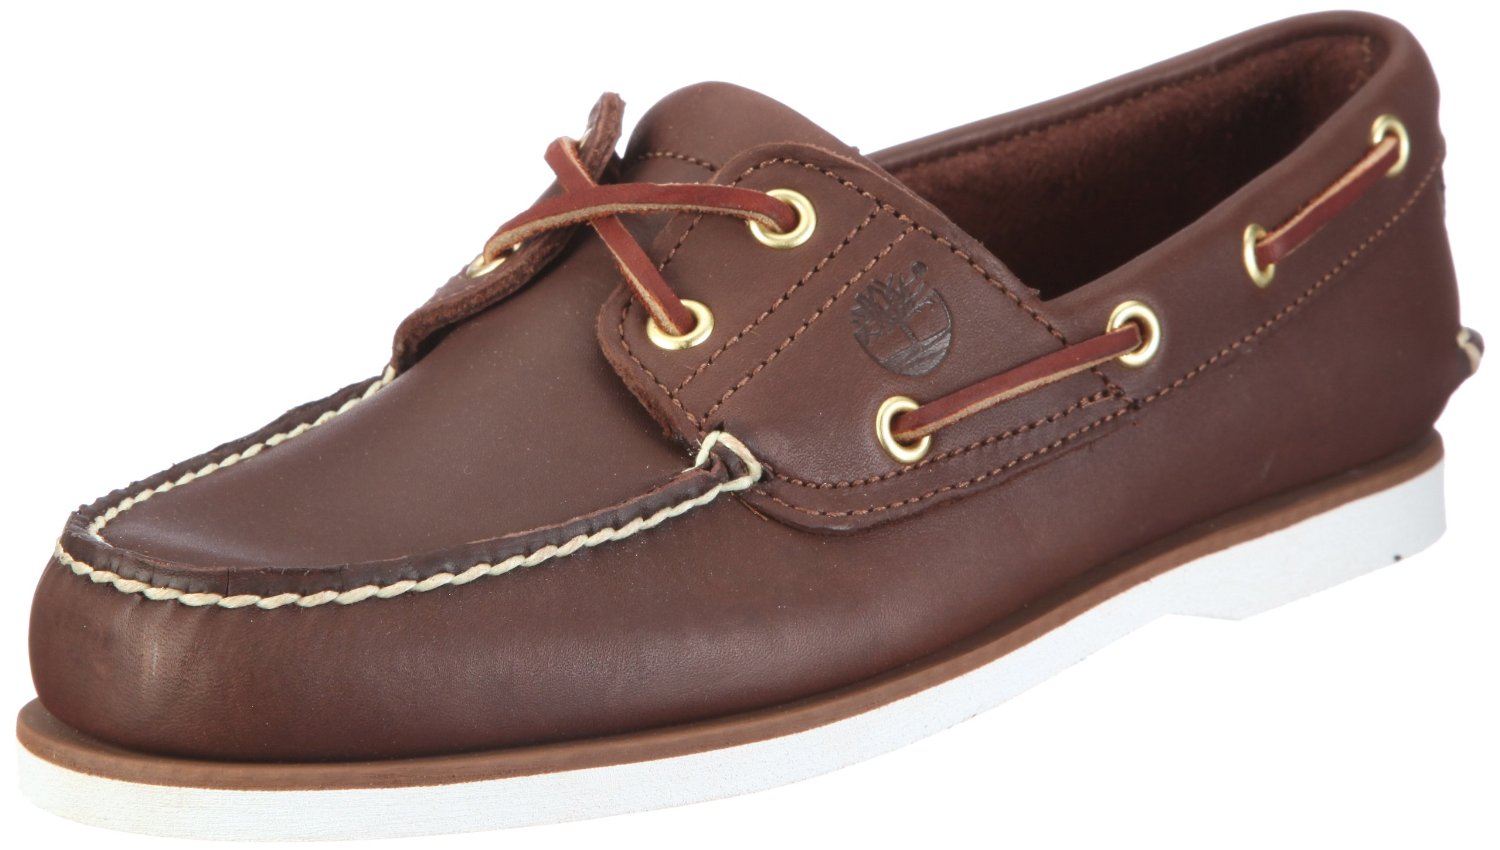 Timberland Timberland Mens Classic 2eye Boat Shoe Rubber Boat Shoe in ...